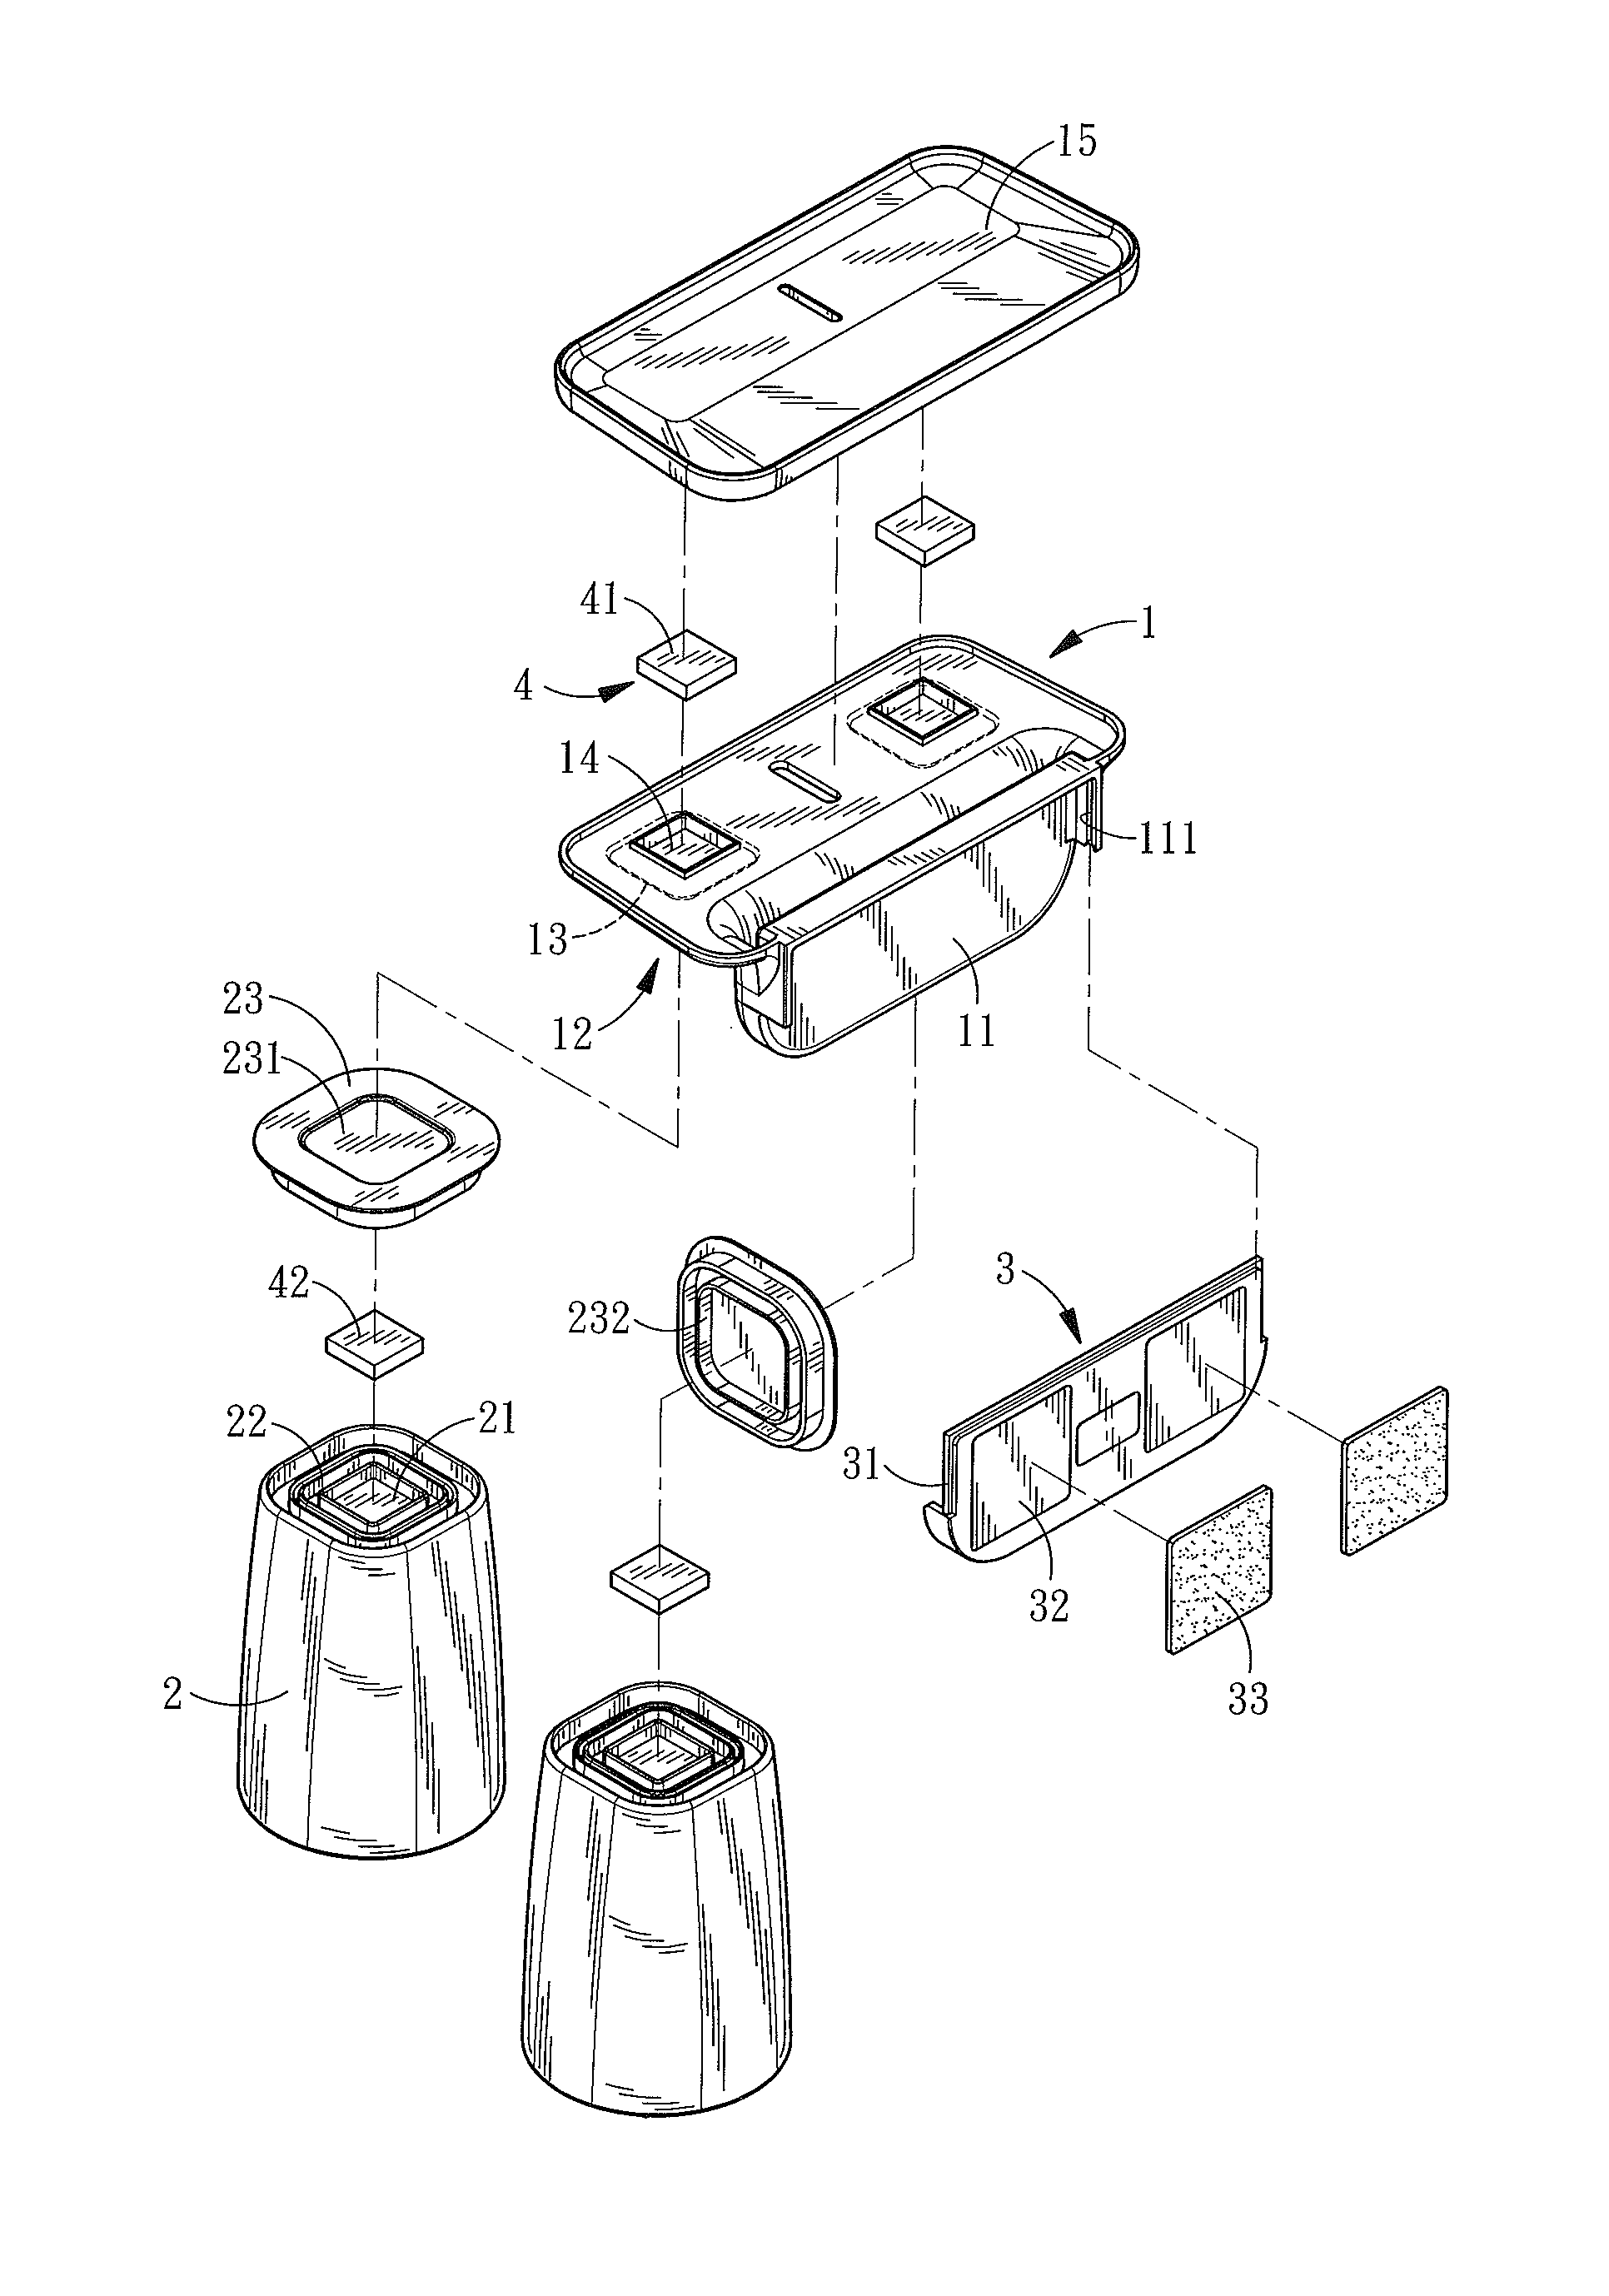 Multiple water containers and holder structure